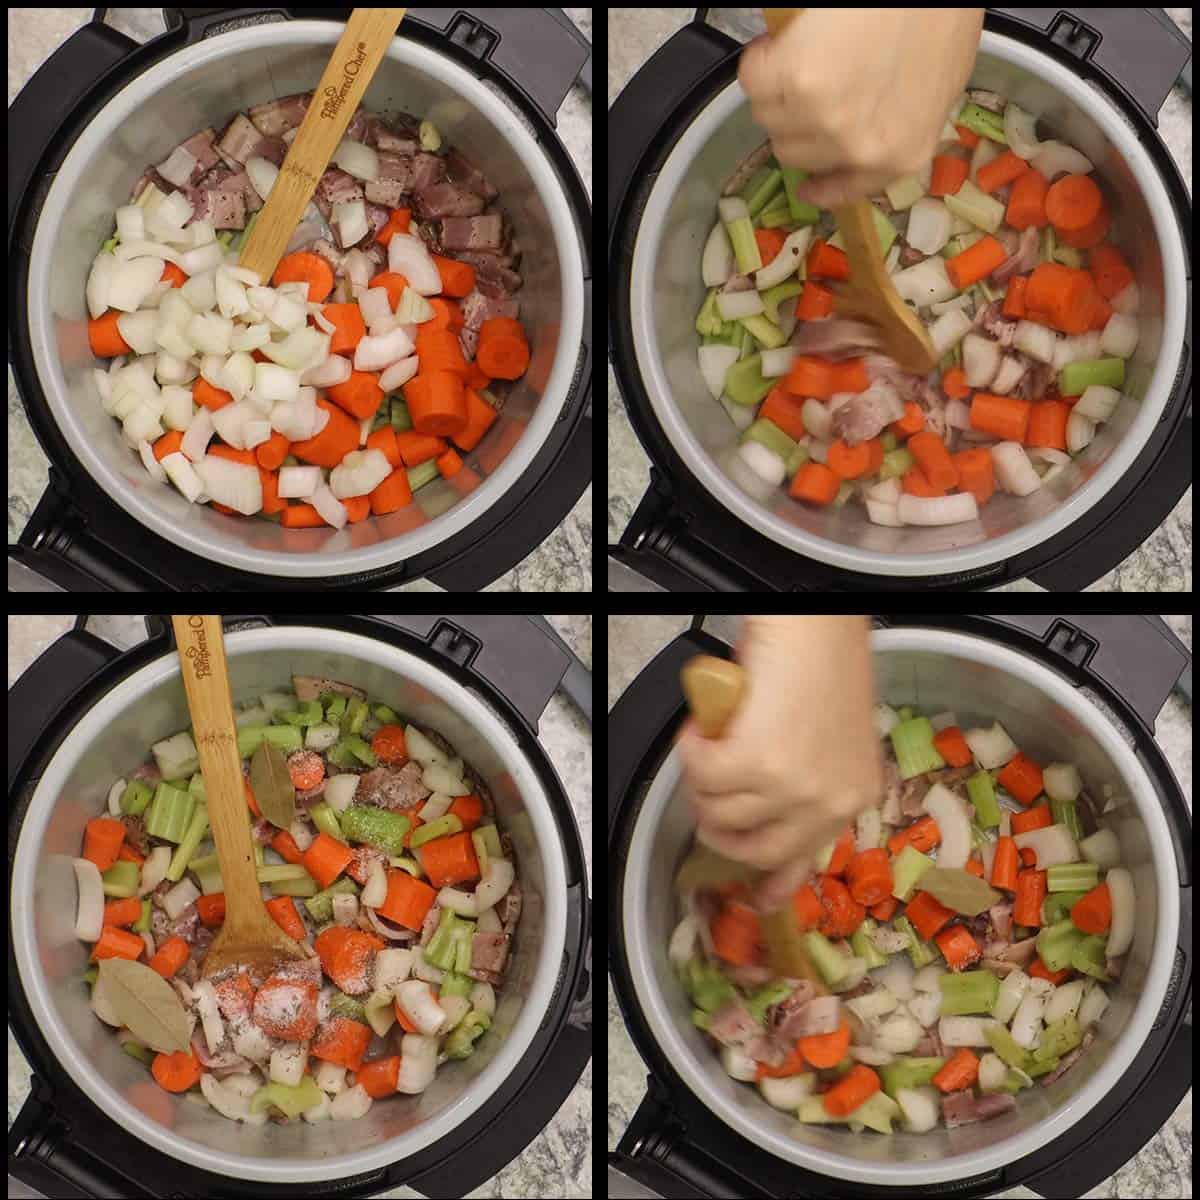 adding the vegetables to the inner pot and stirring.